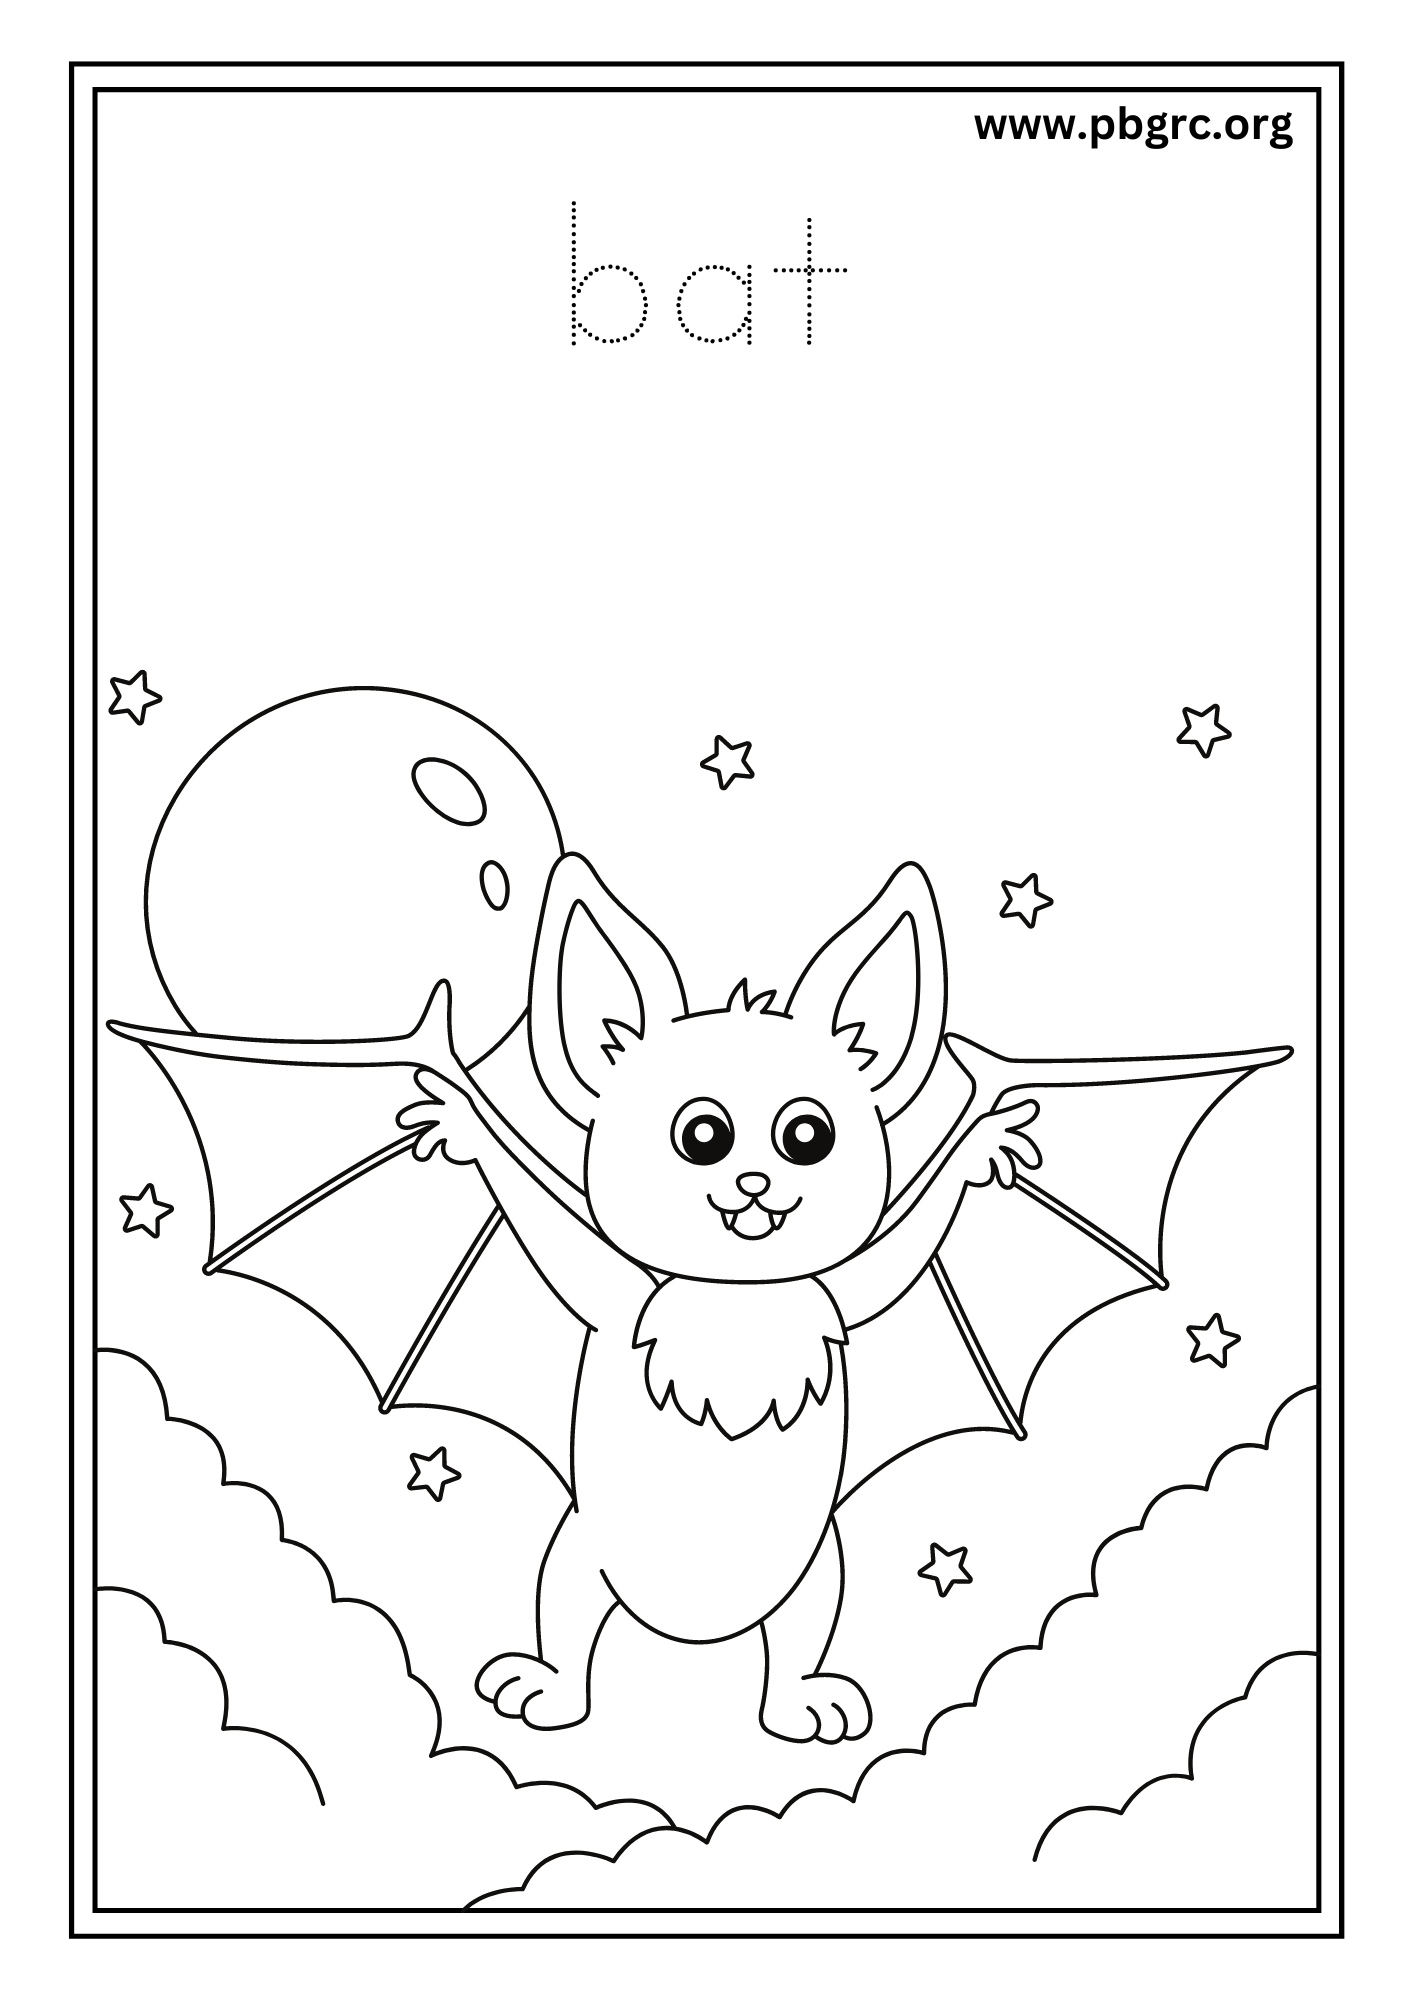 Baby Animal Coloring Pages